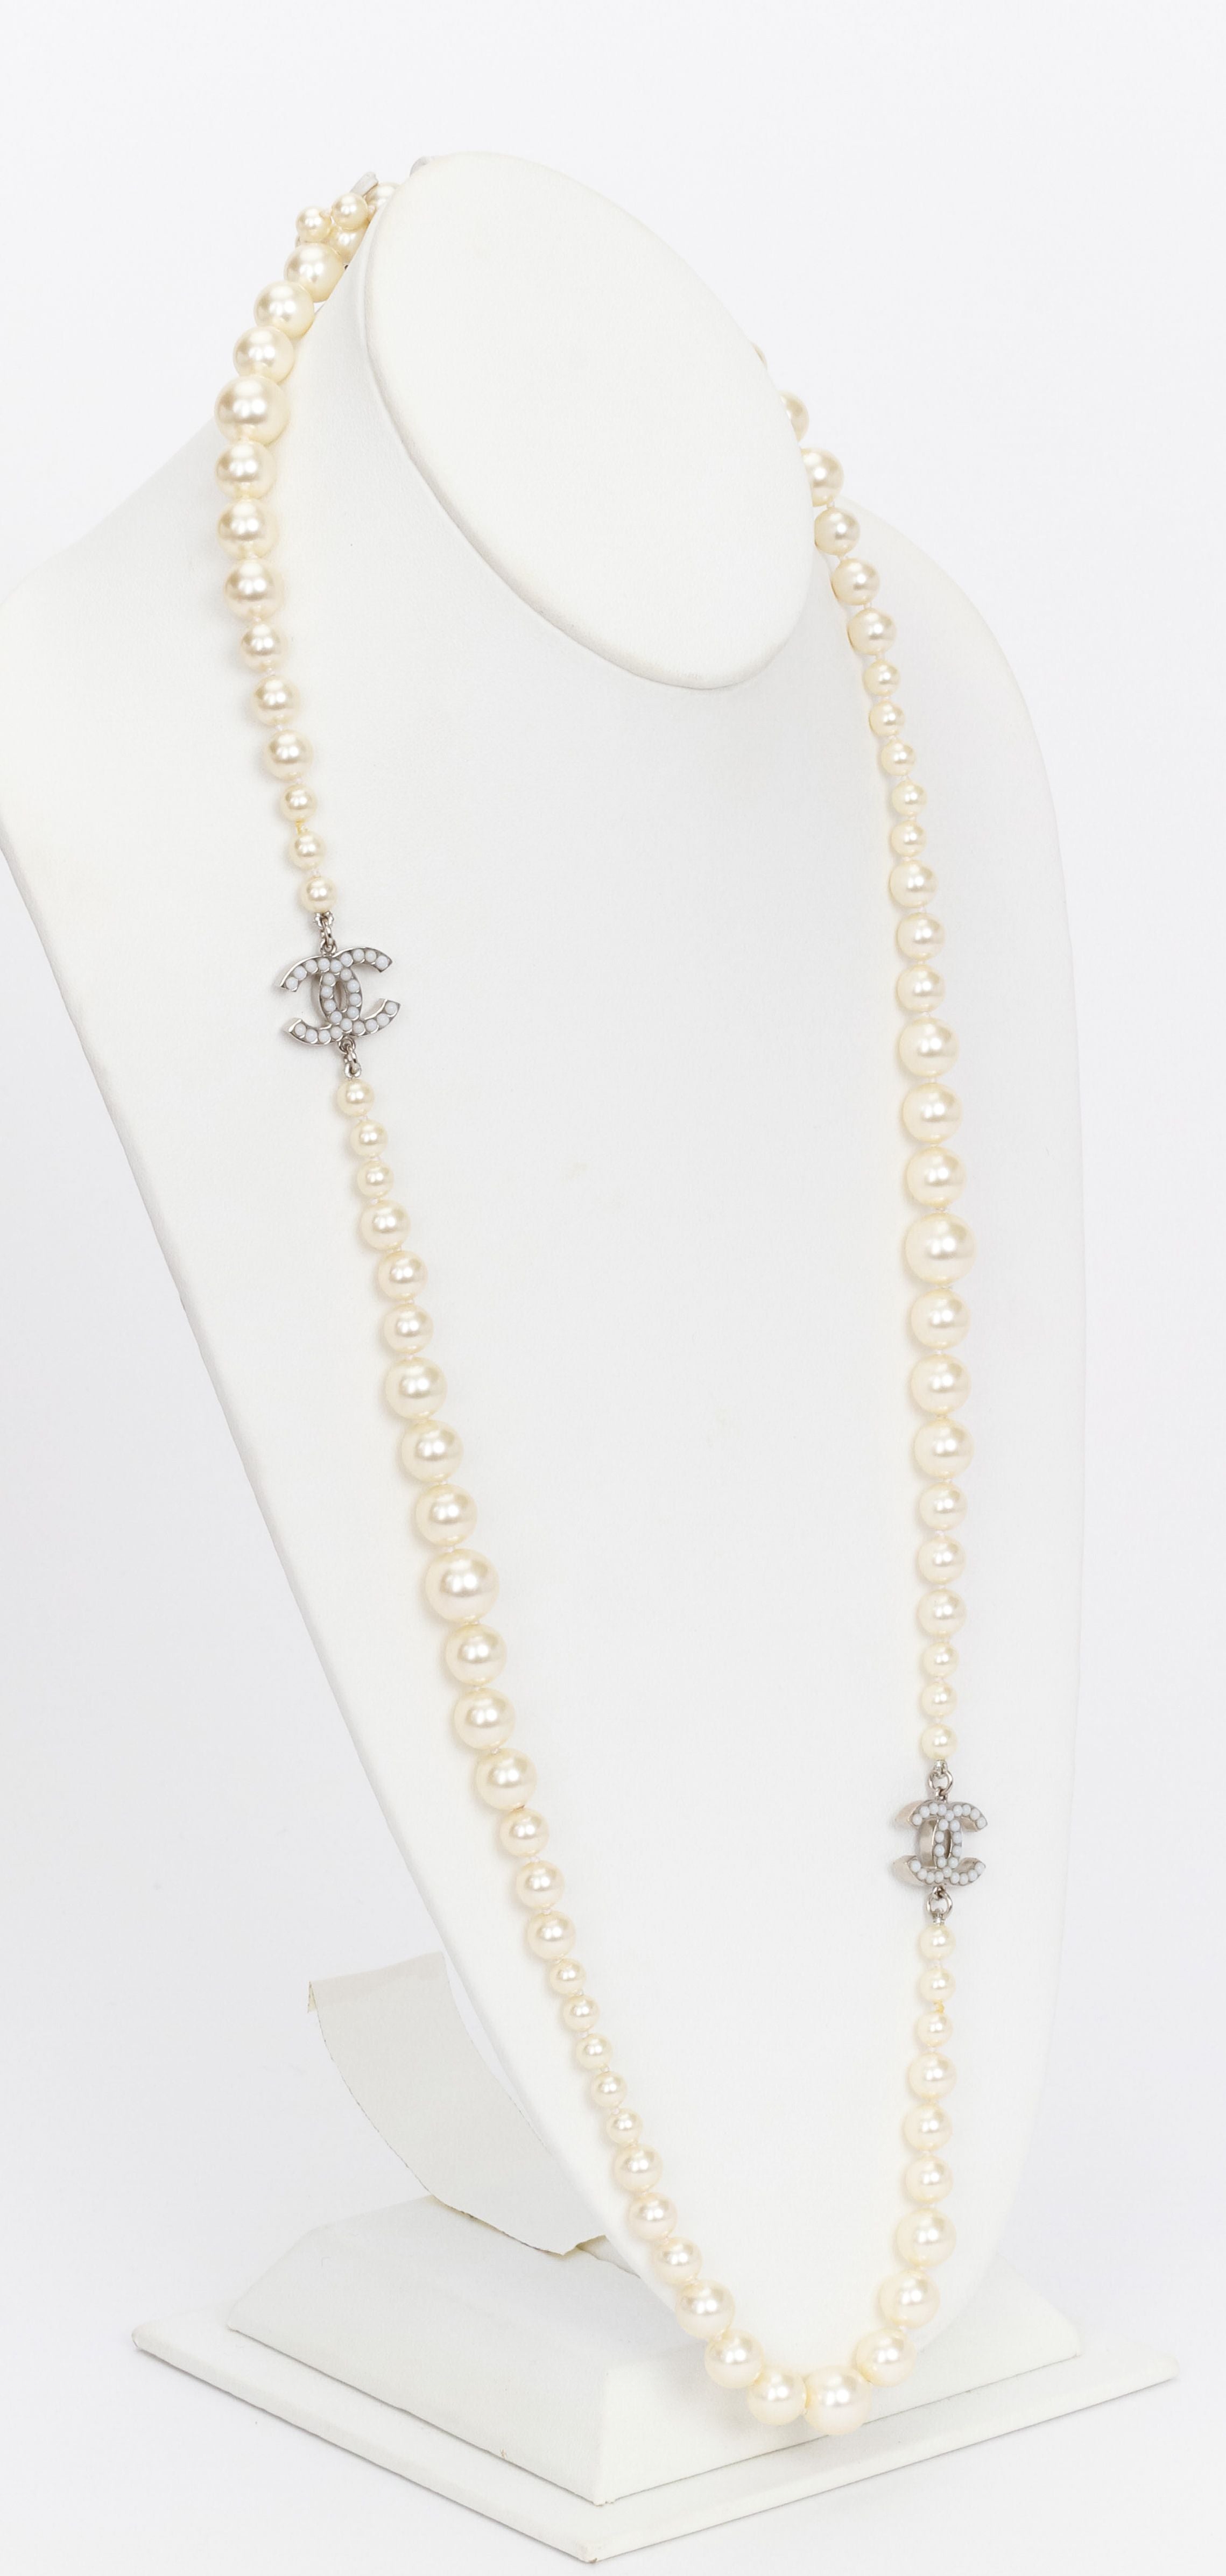 Chanel spring 2012 long pearl necklace - Vintage Lux